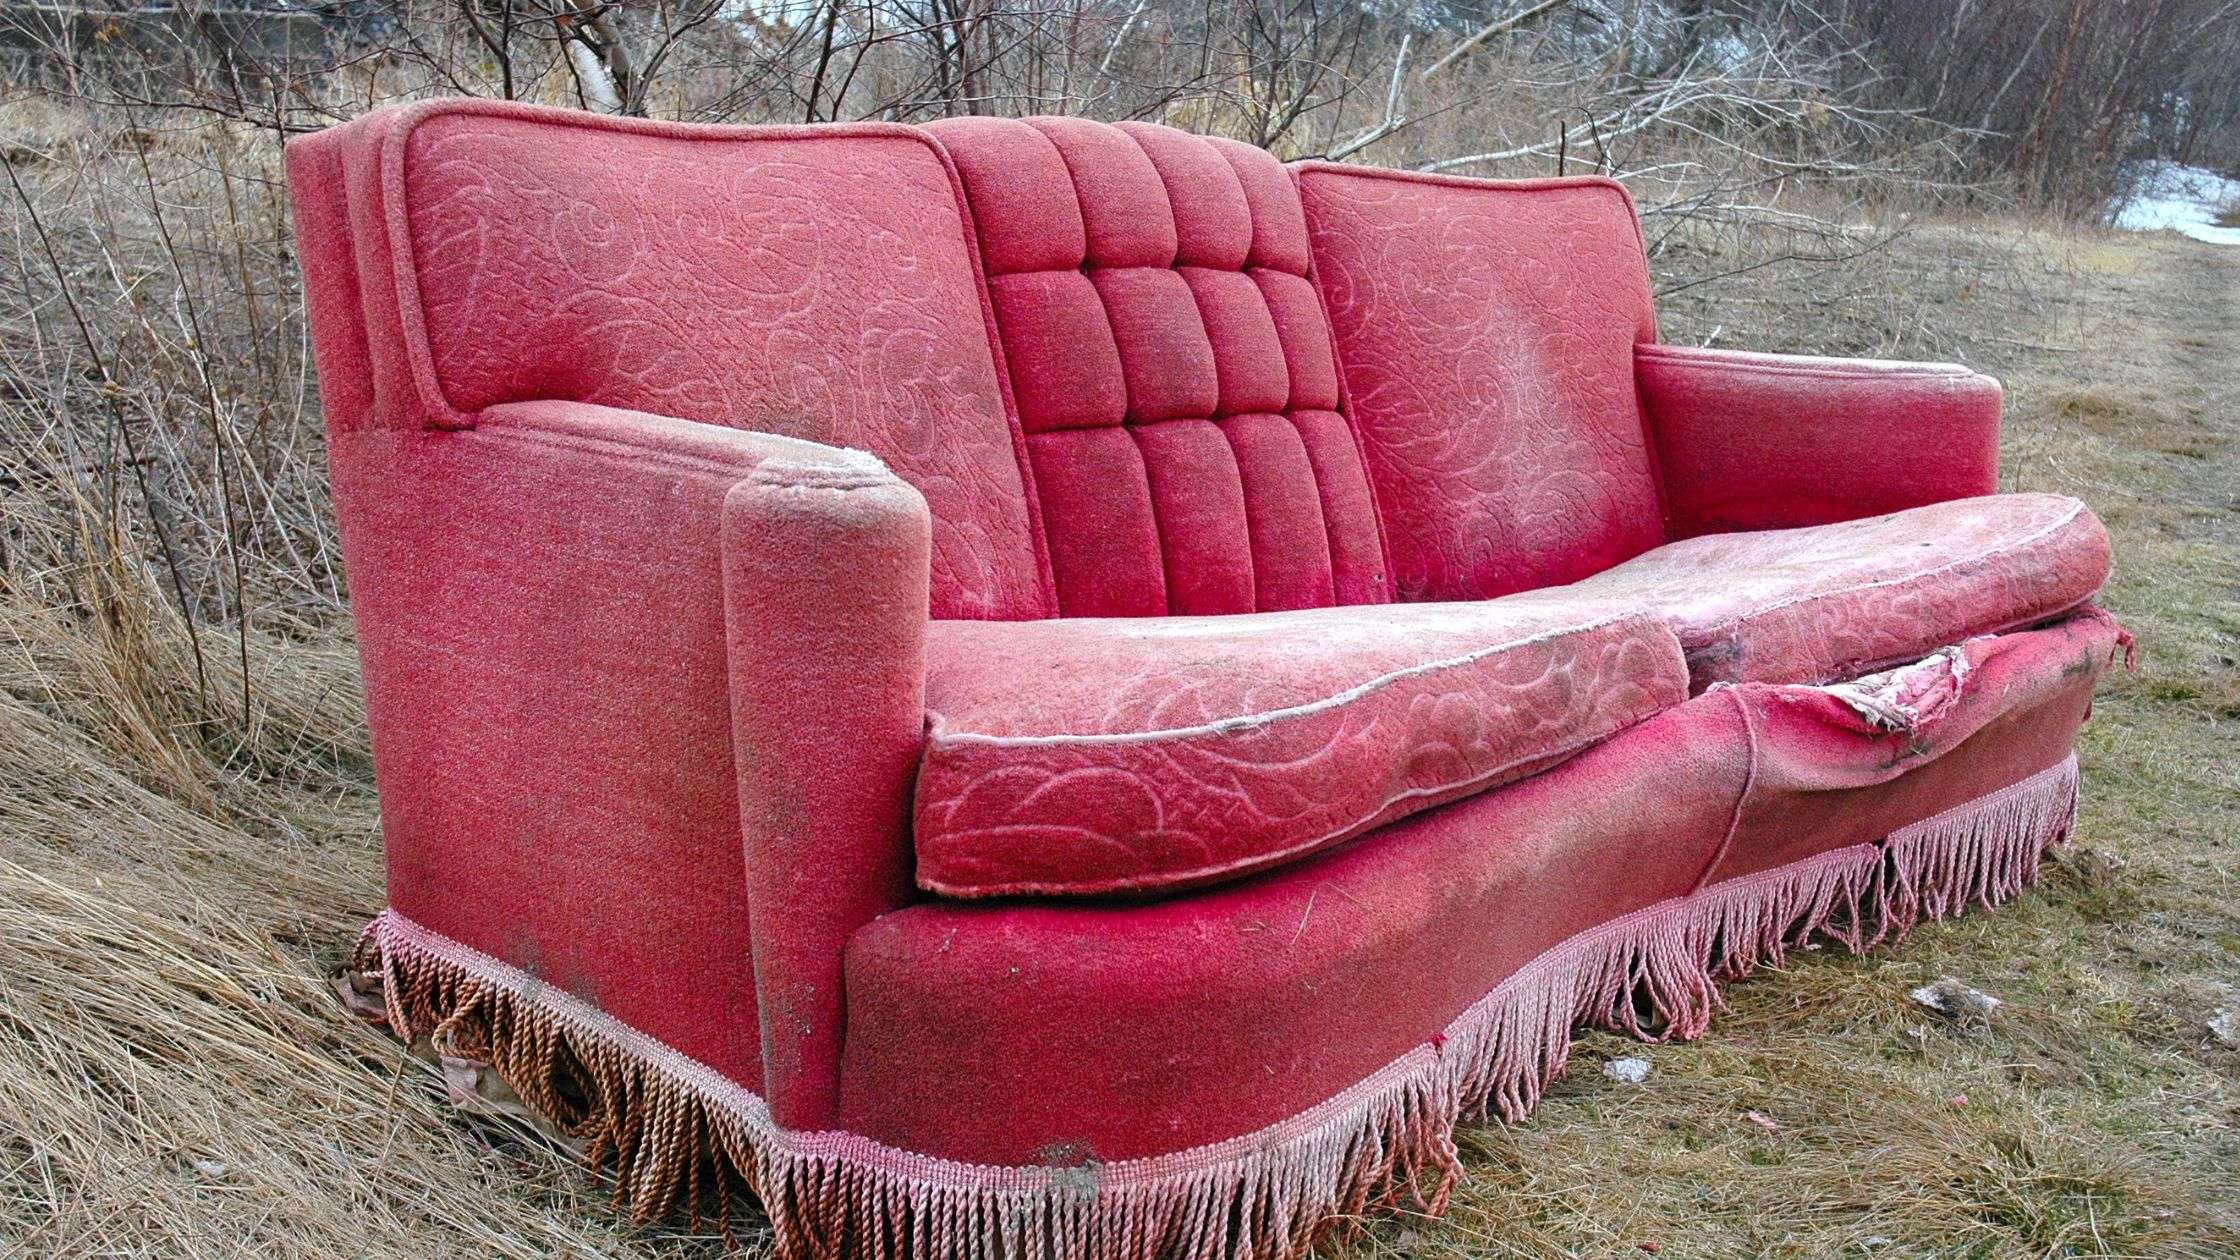 Some Tips On Getting Rid Of Your Old Couch